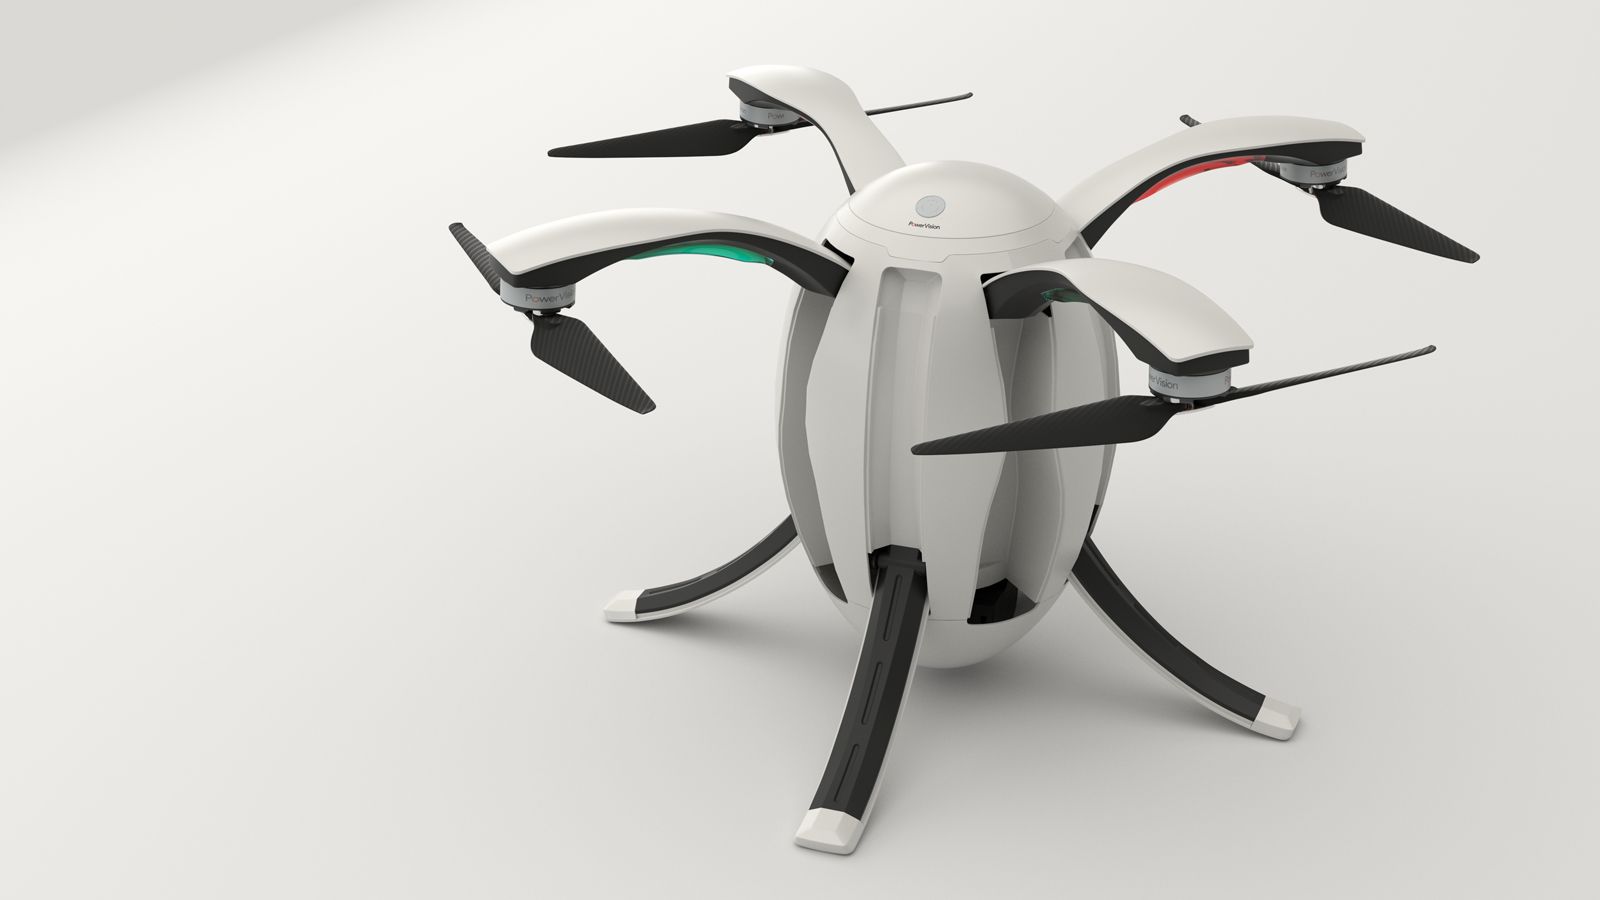 poweregg is a 1290 drone offering gesture controls image 1